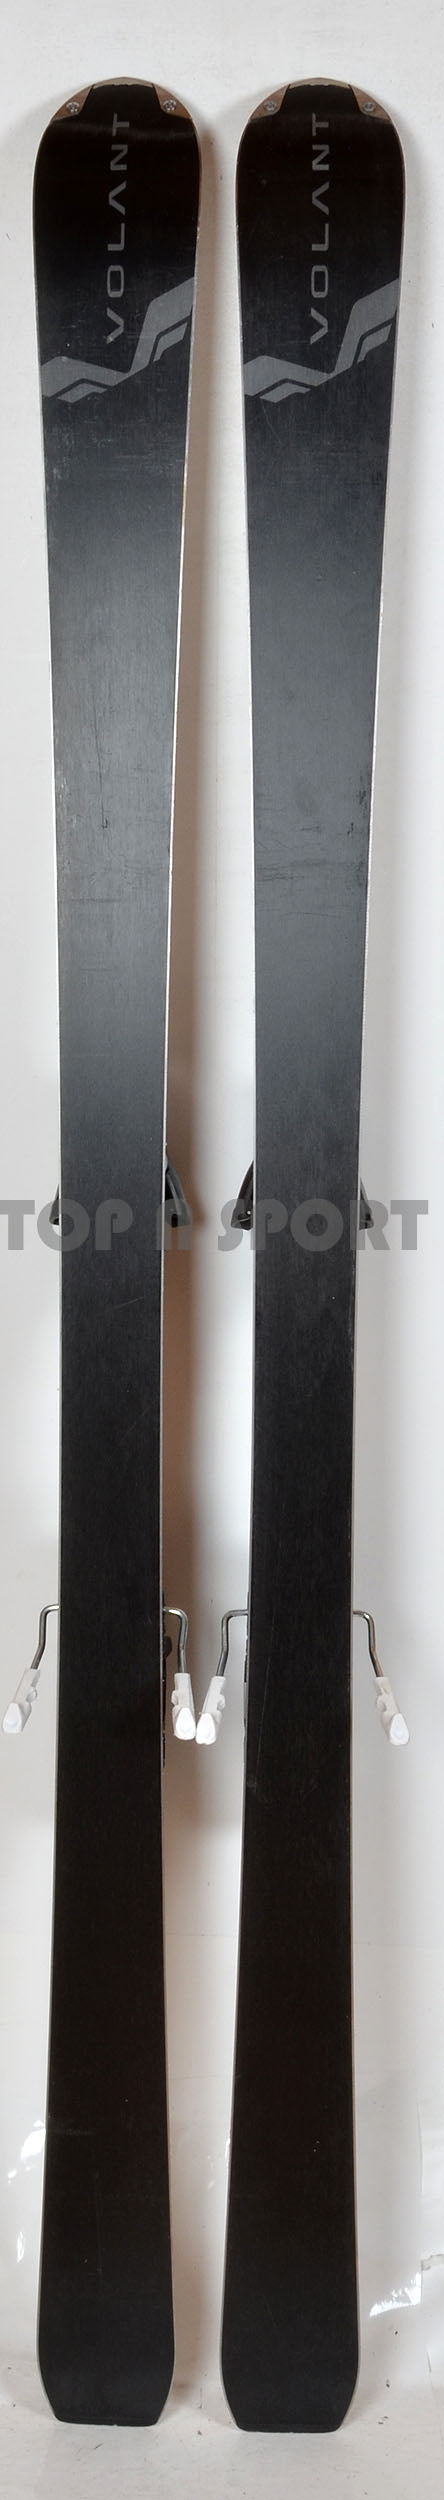 Volant PURE SILVER 2016 - skis d'occasion